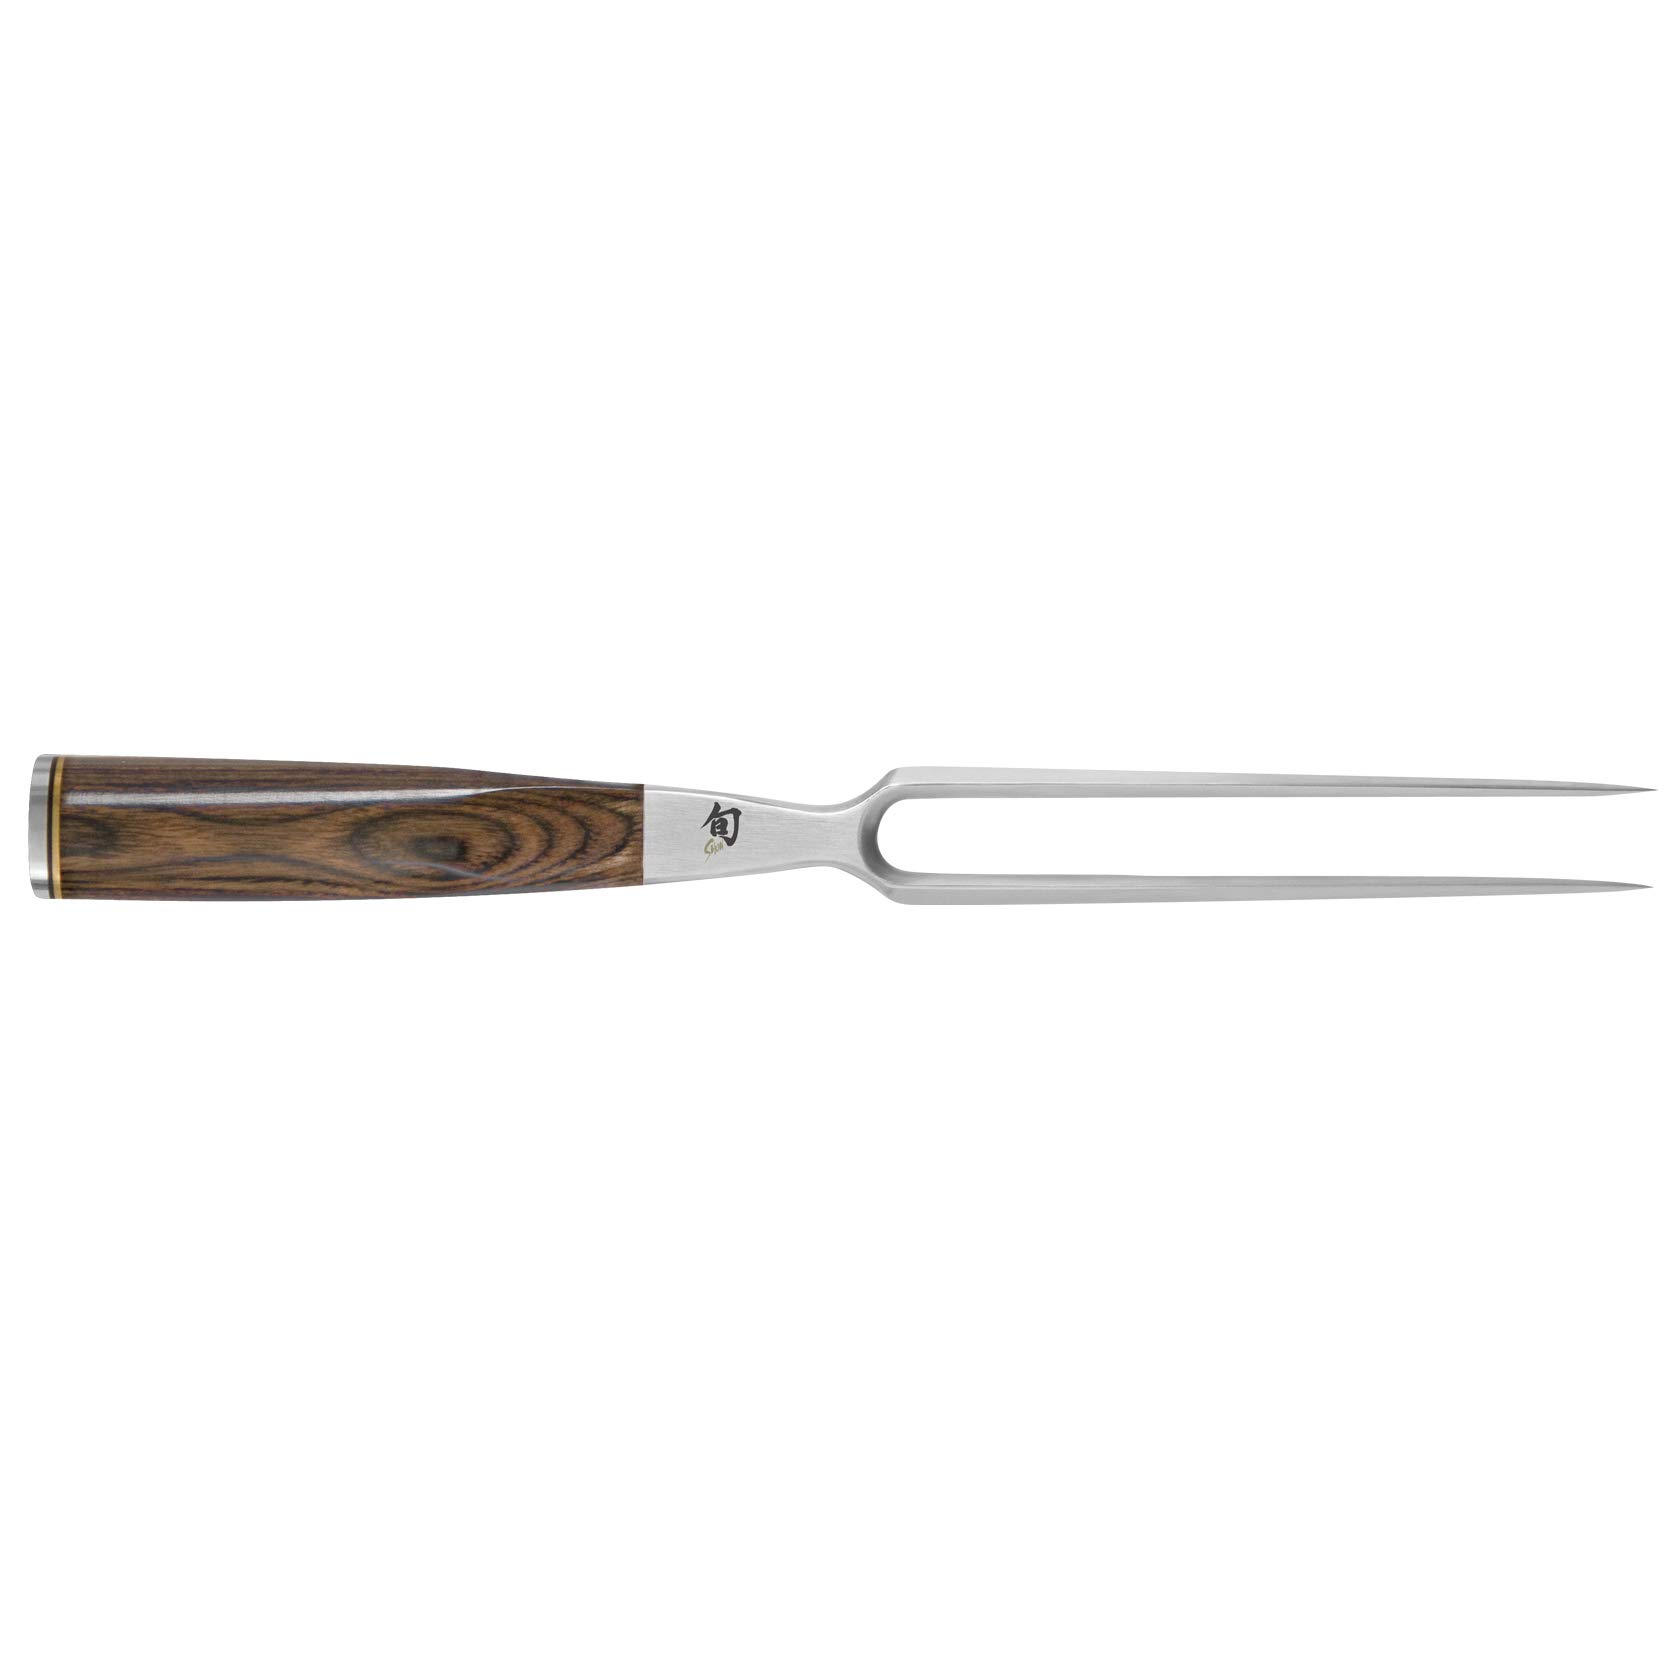 Shun Premier Two-Pronged Carving Fork; Safely Slice and Carve Roasts, Ham and Poultry With a Steadying Carving Fork; Stainless Steel, 6.5-inch Tines; Beautiful Walnut-Colored PakkaWood Handle